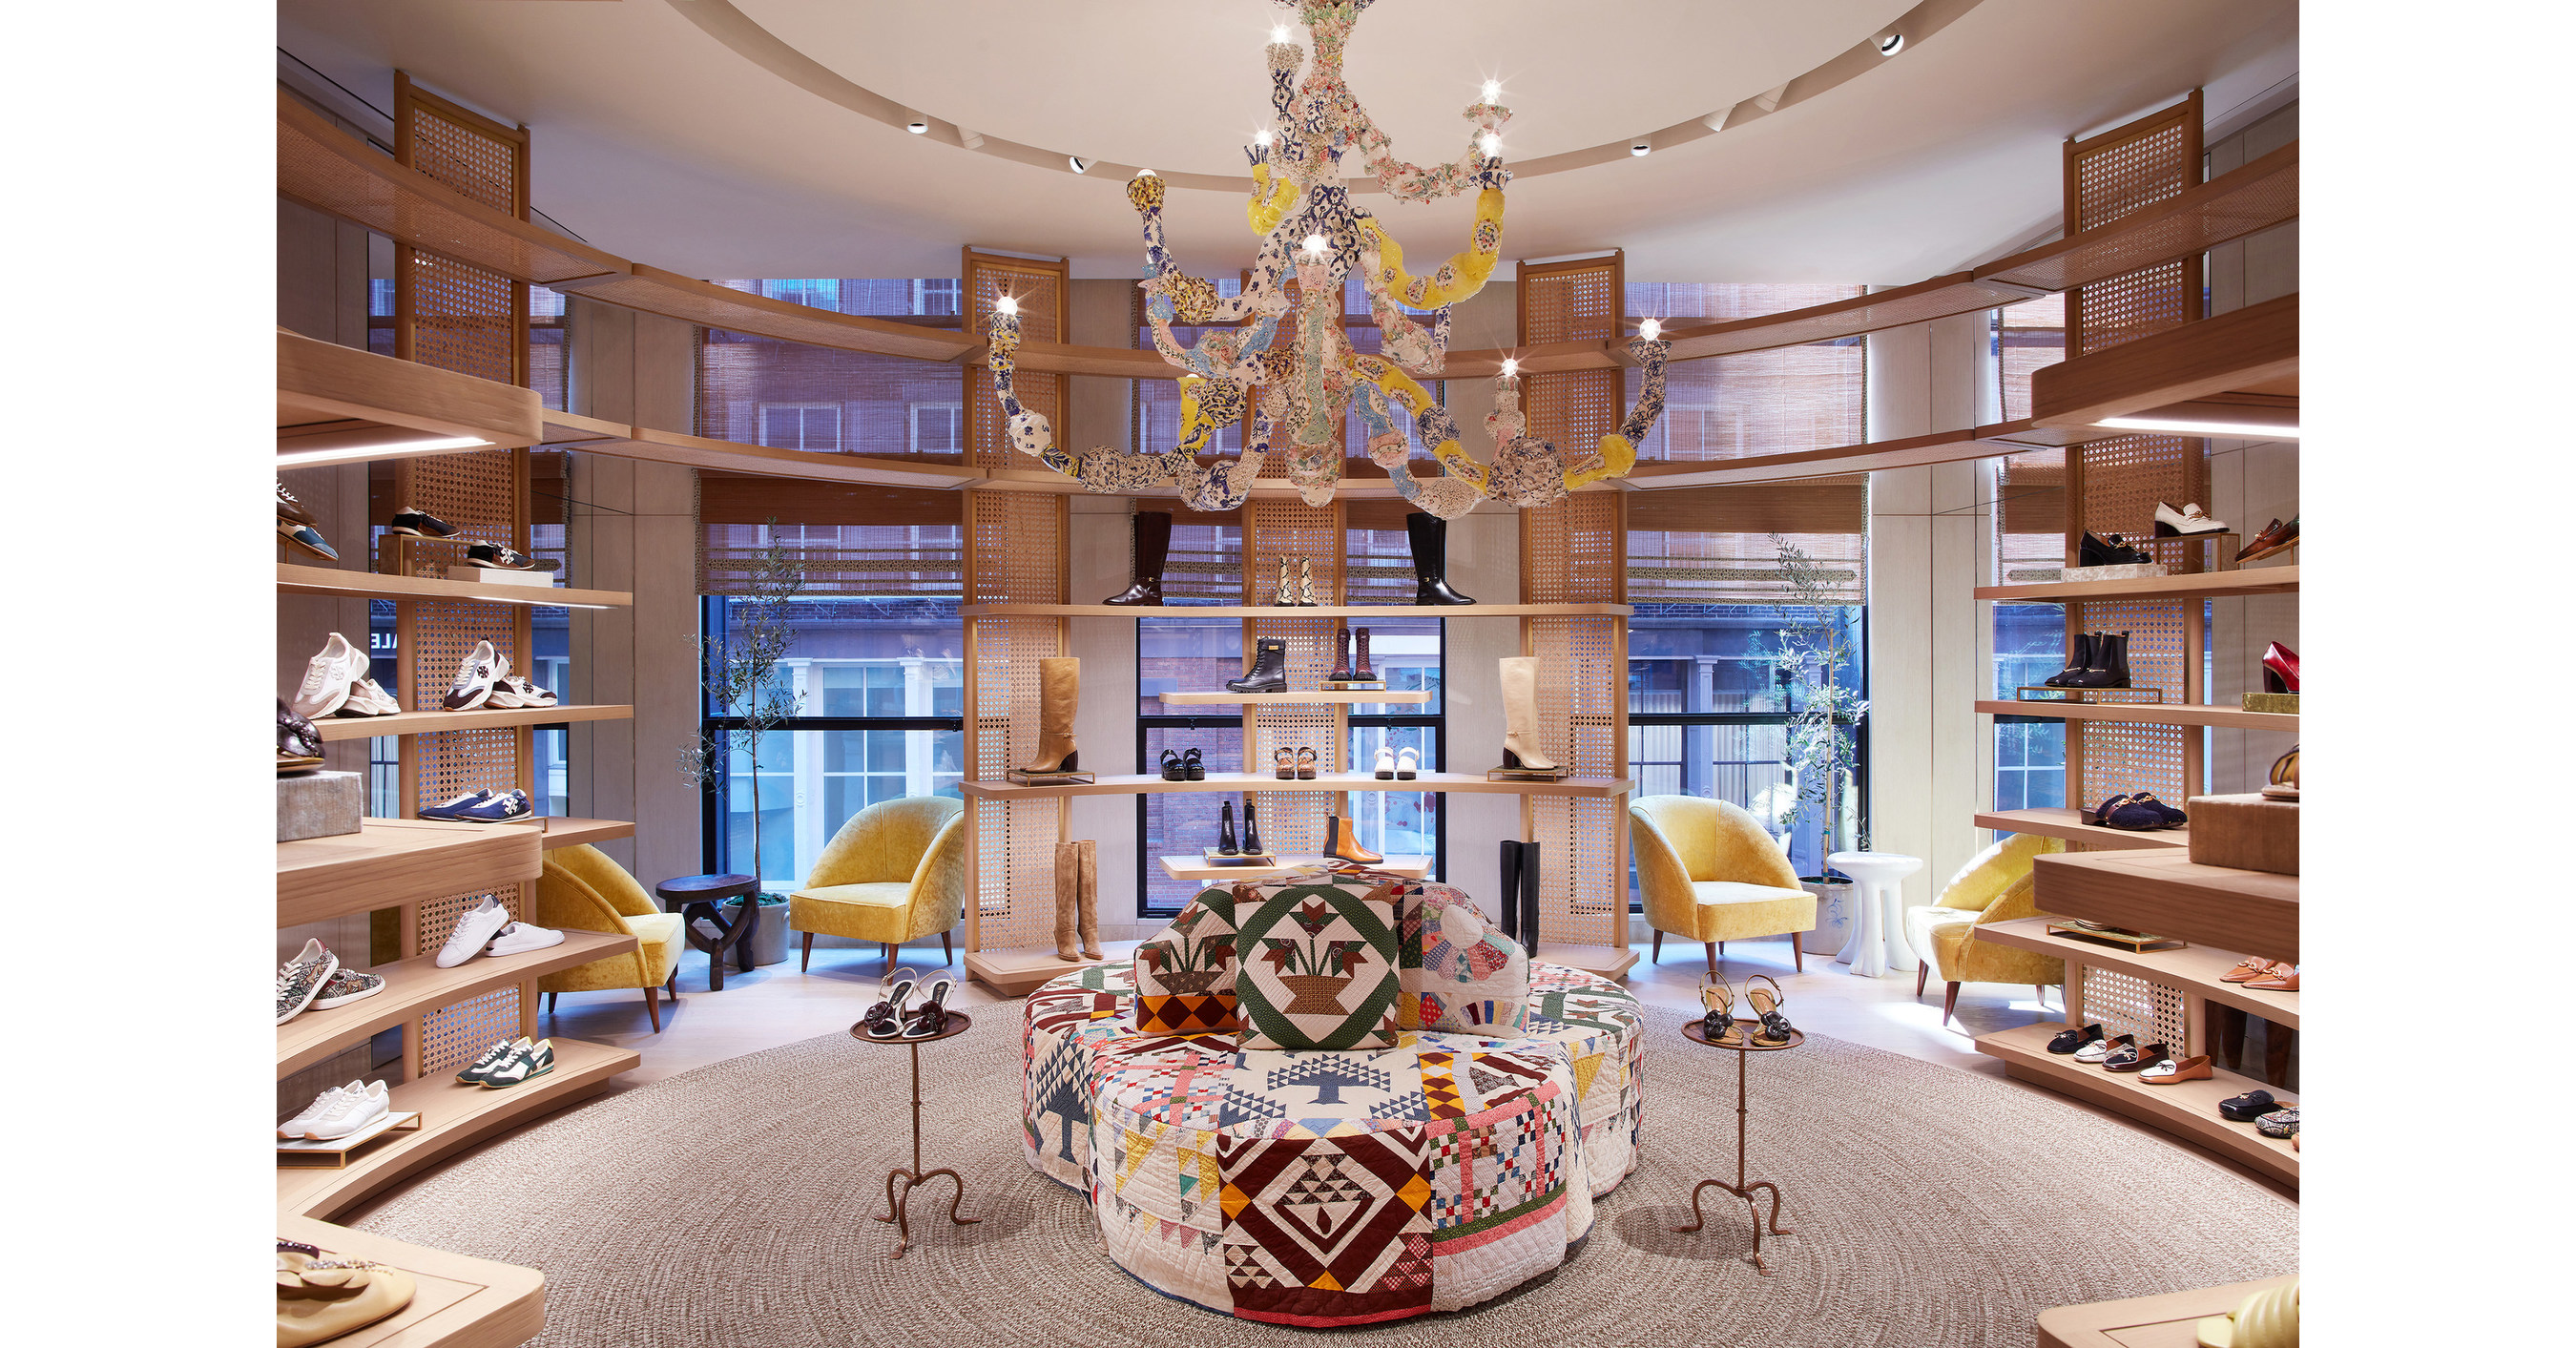 Tory Burch Unveils A New Store Concept On Mercer Street, As SoHo